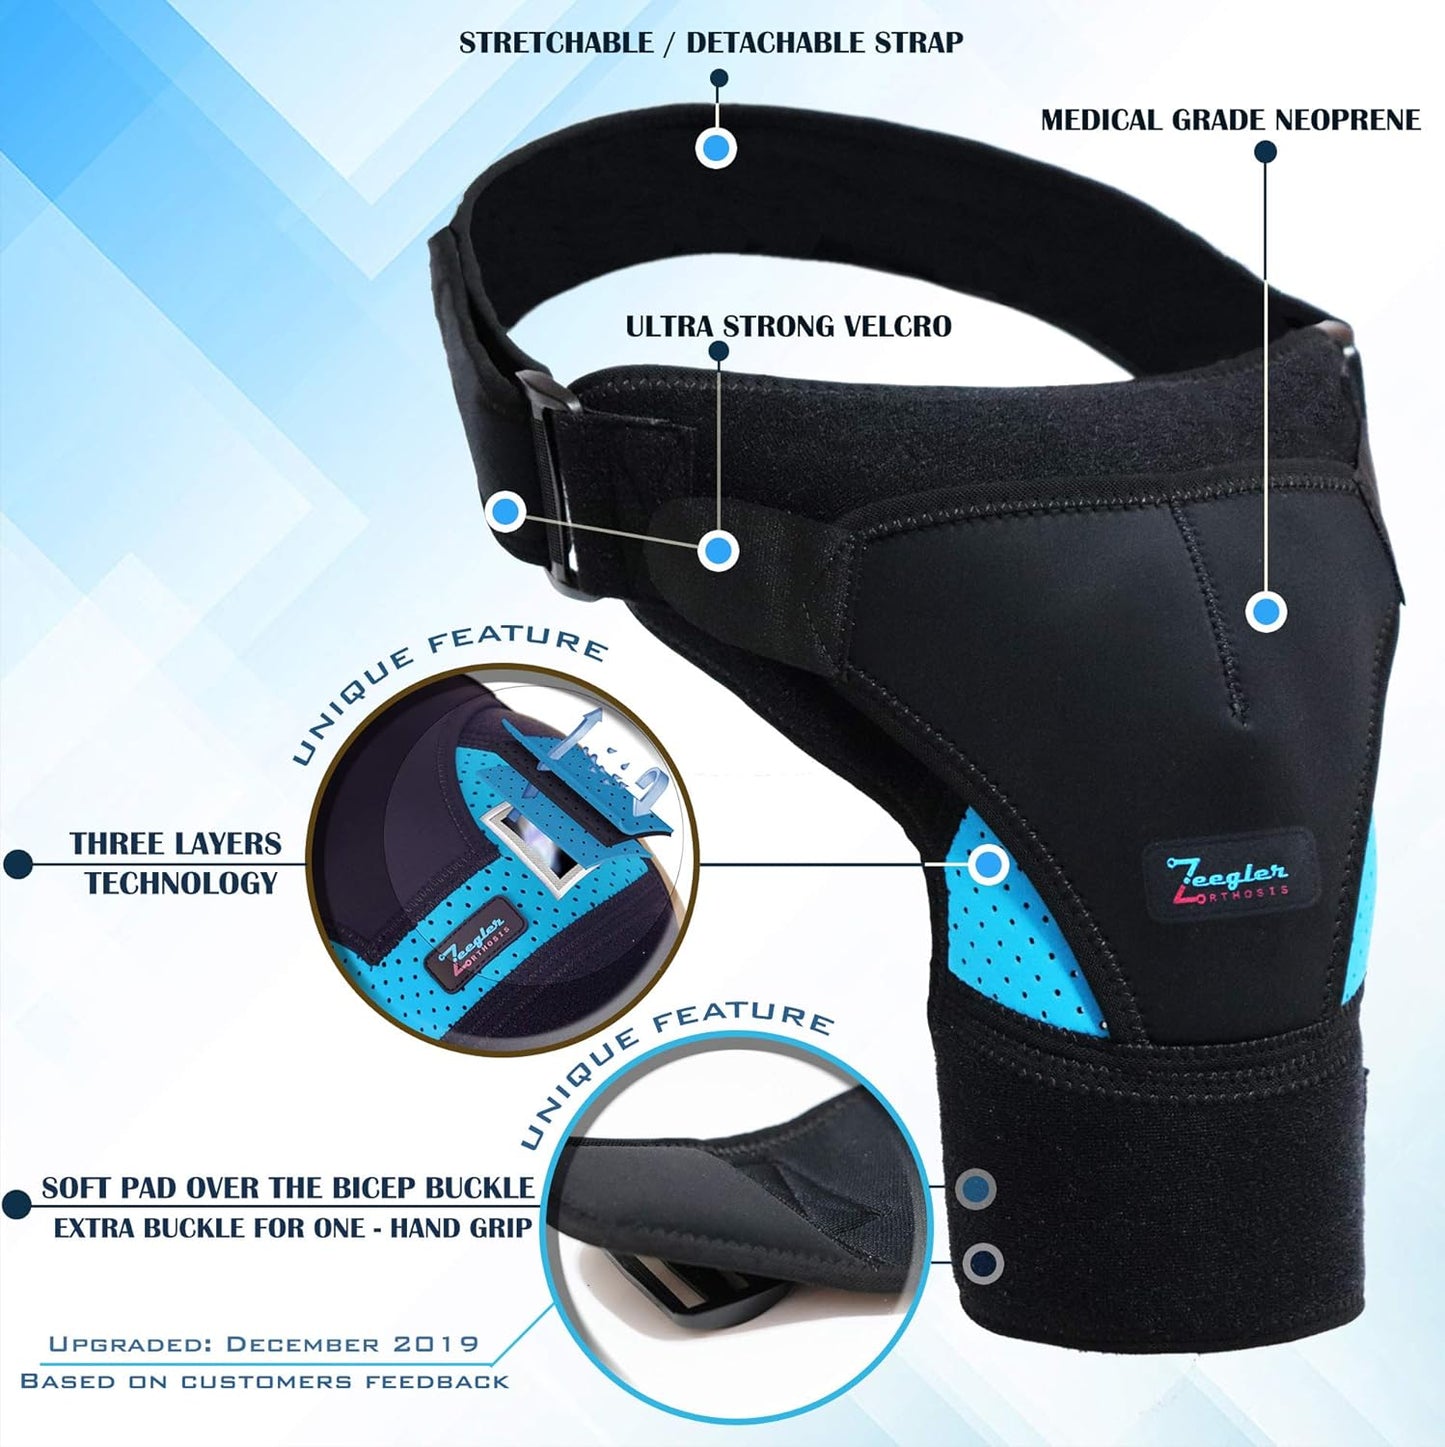 Shoulder Brace for Men and Women - Support for Torn Rotator Cuff, AC Joint Pain Relief and Dislocated Shoulder. Compression Sleeve, Arm Immobilizer Wrap, Stability Strap + Free Extension, Left-Right